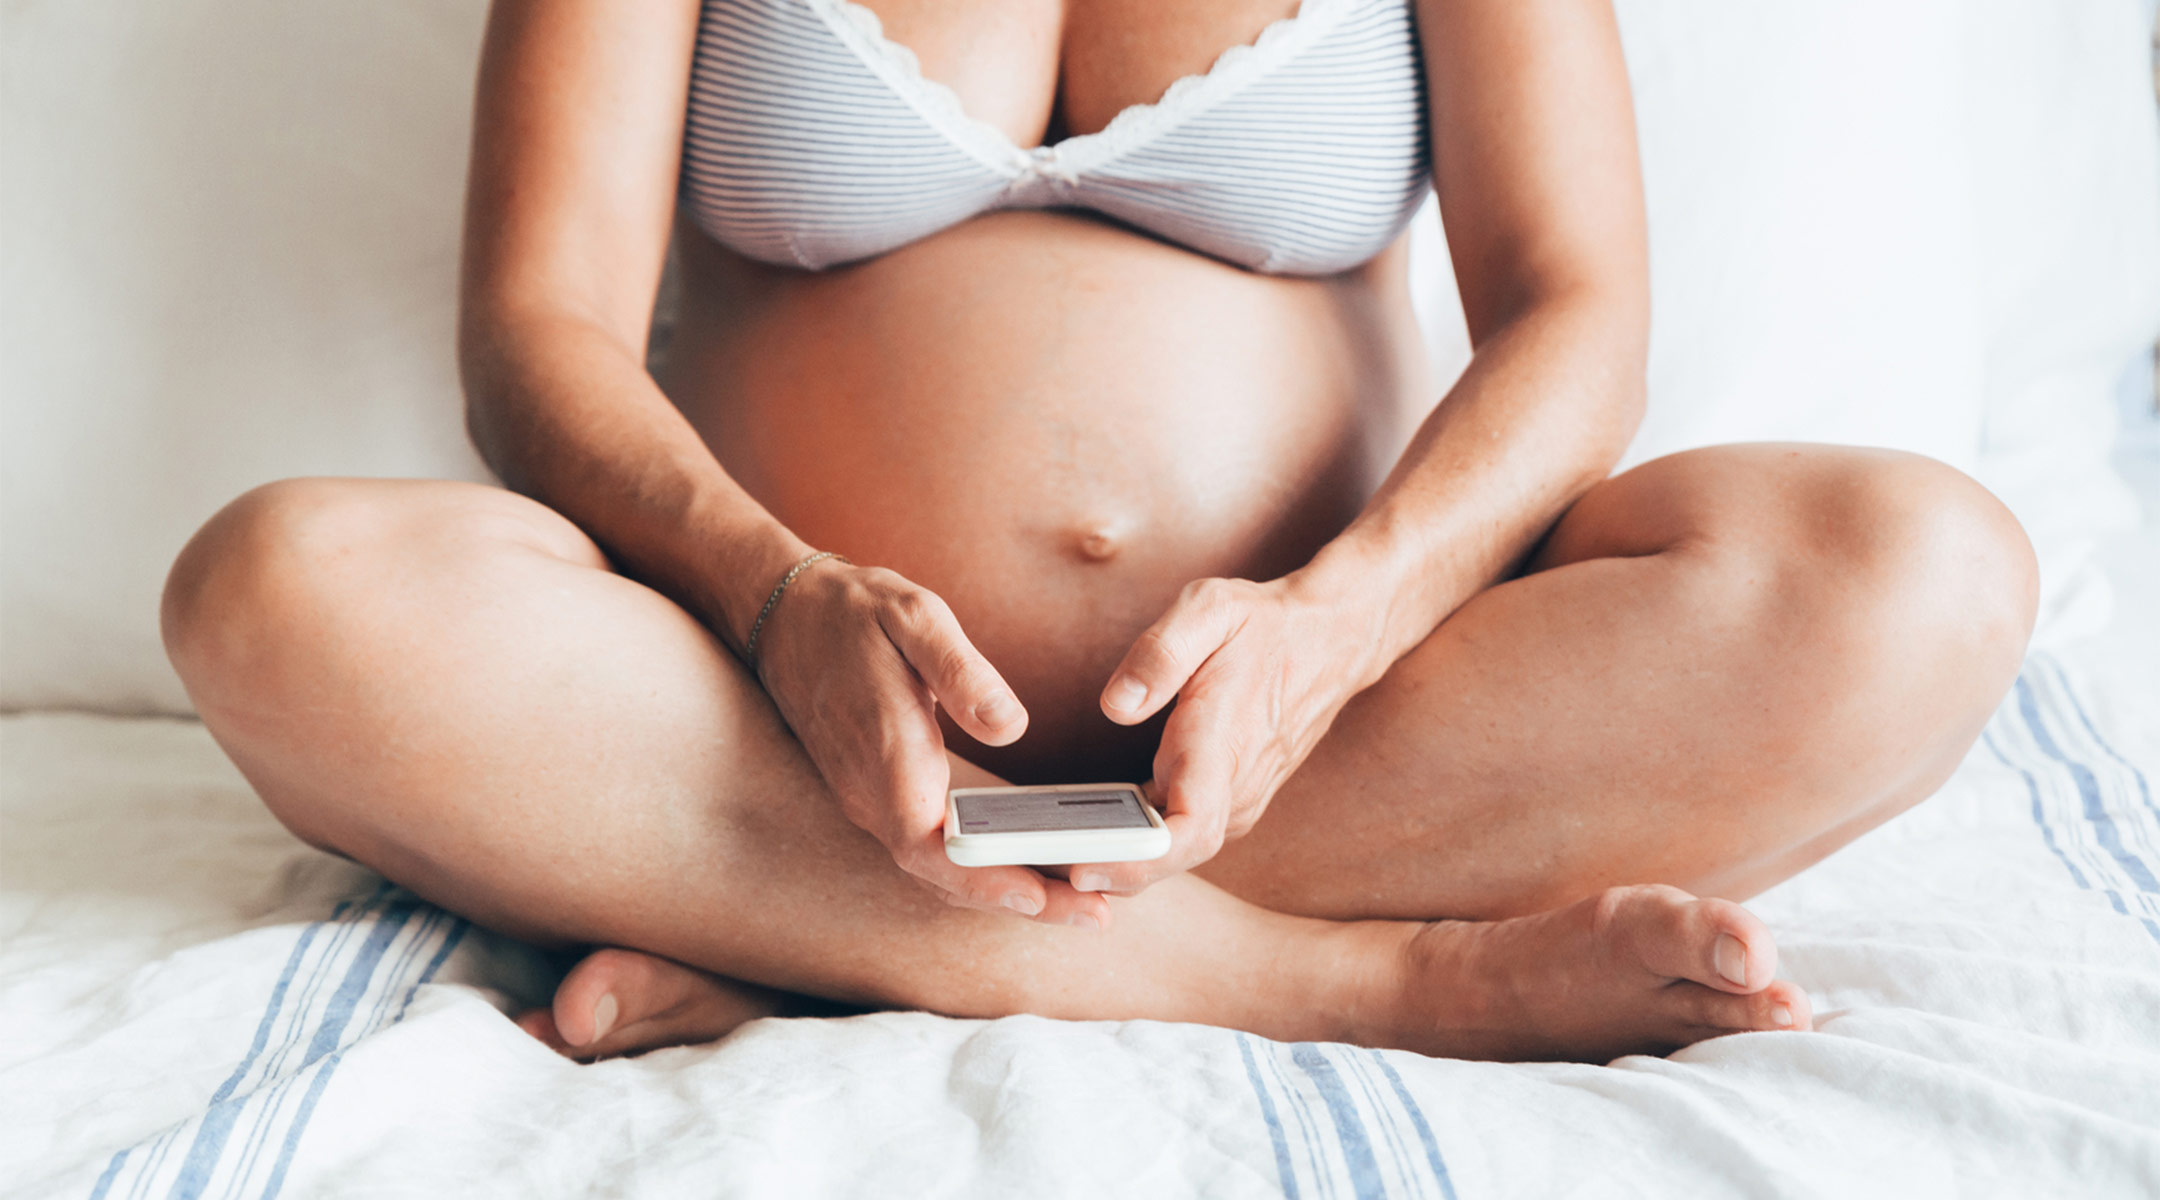 pregnant woman sitting on bed in her underwear with her phone